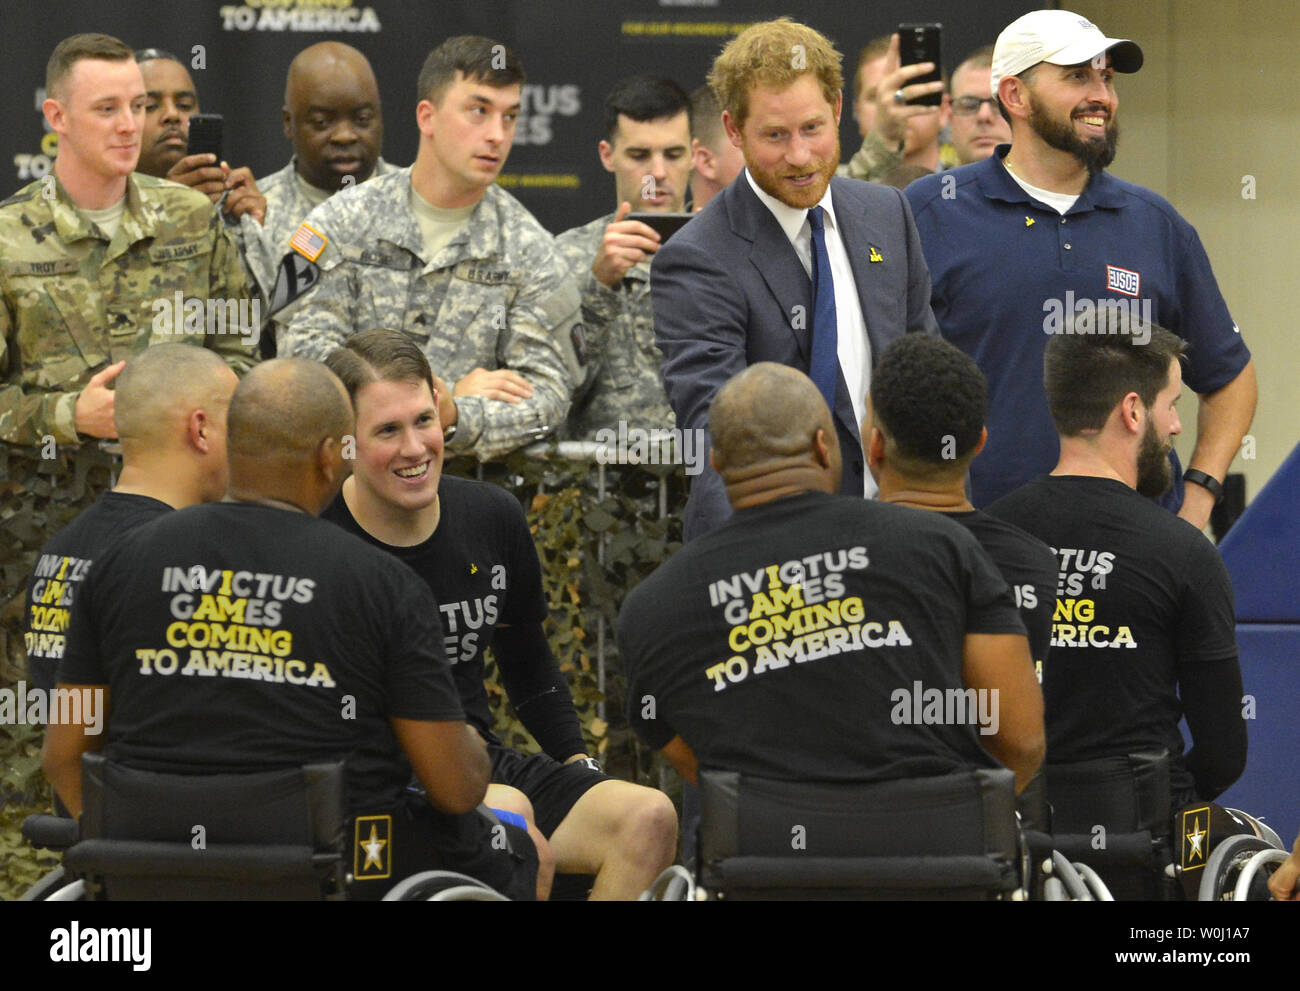 HRH Prince Harry thanks members of the basketball team at the conclusion of  a game by wounded service members, October 28, 2015, at Ft. Belvoir, Virginia. The event is a celebration of the Joining Forces Initiative and the upcoming 2016 Invictus Games in Orlando, Florida, in which wounded military personnel compete in sporting competition.       Photo by Mike Theiler/UPI Stock Photo